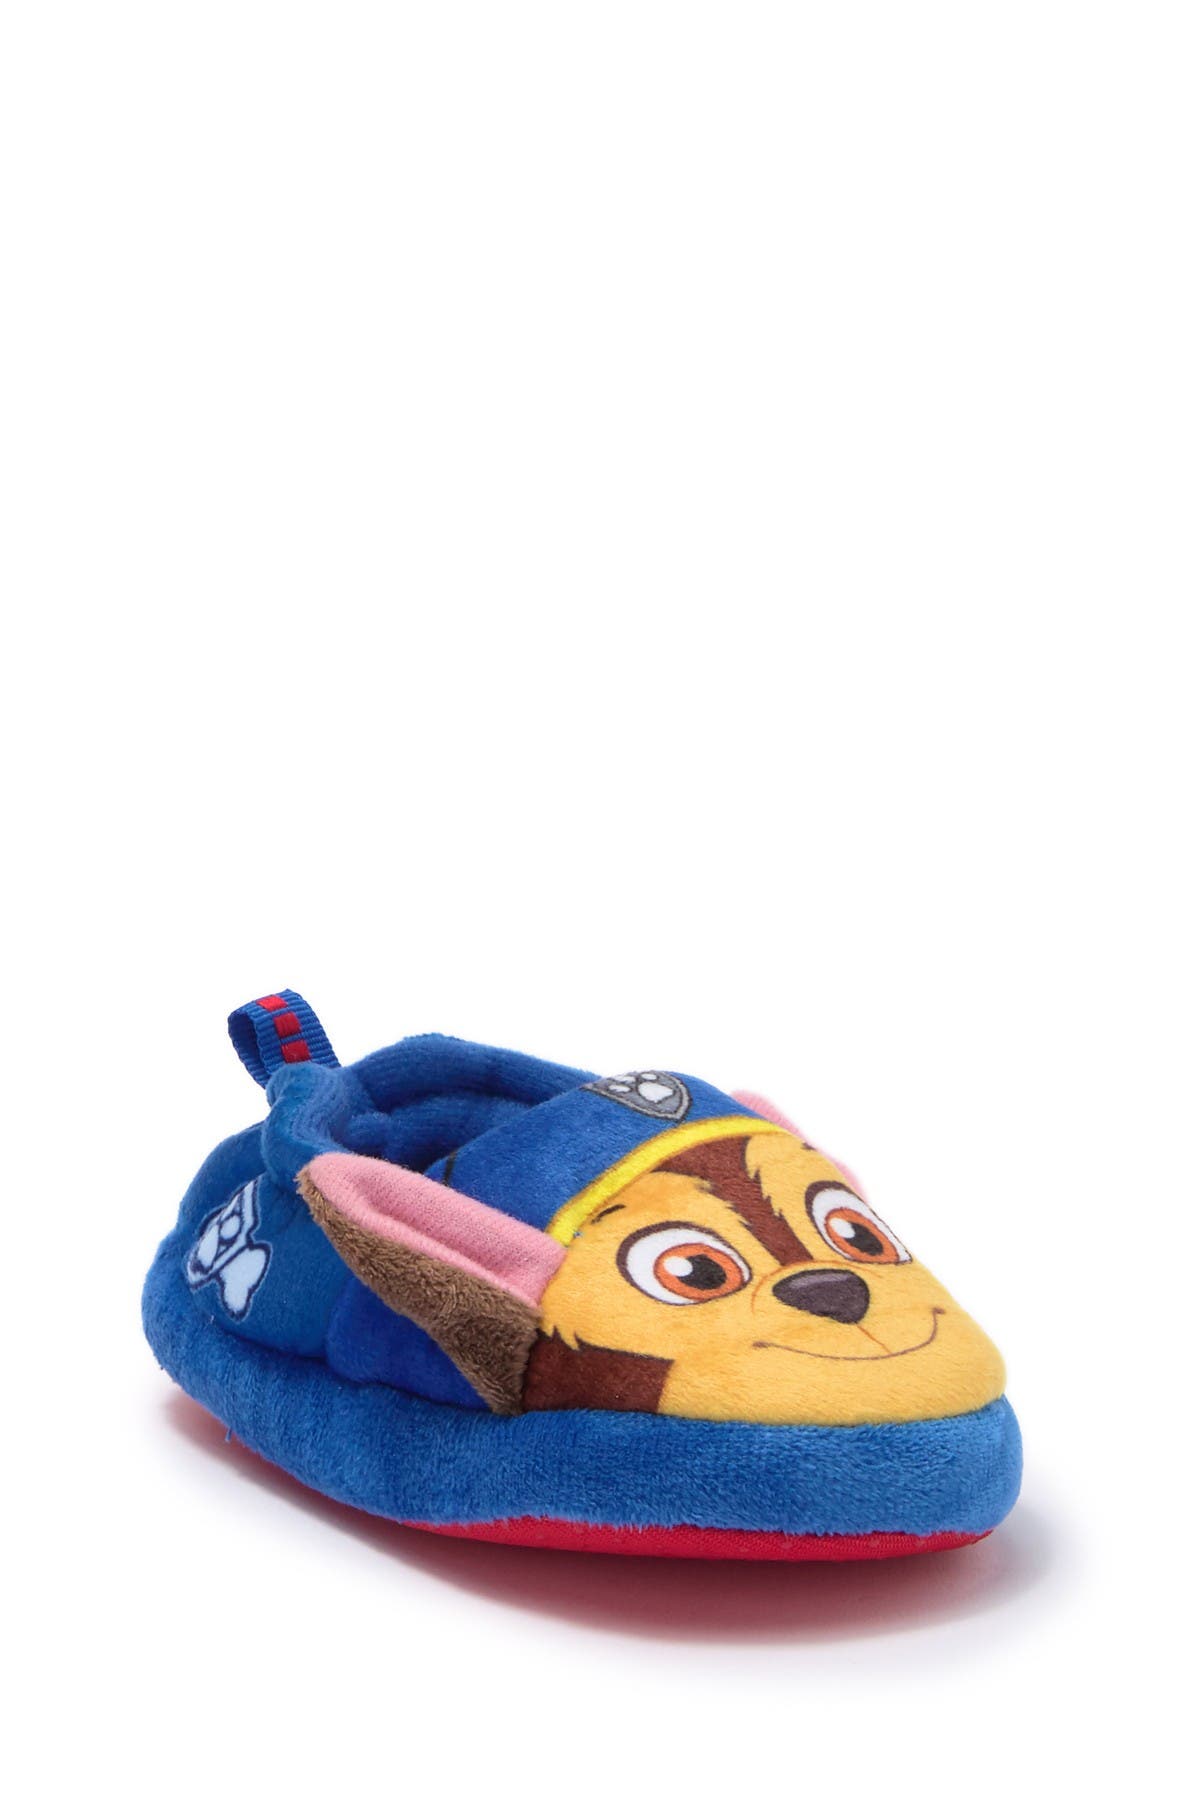 boys slippers size 8